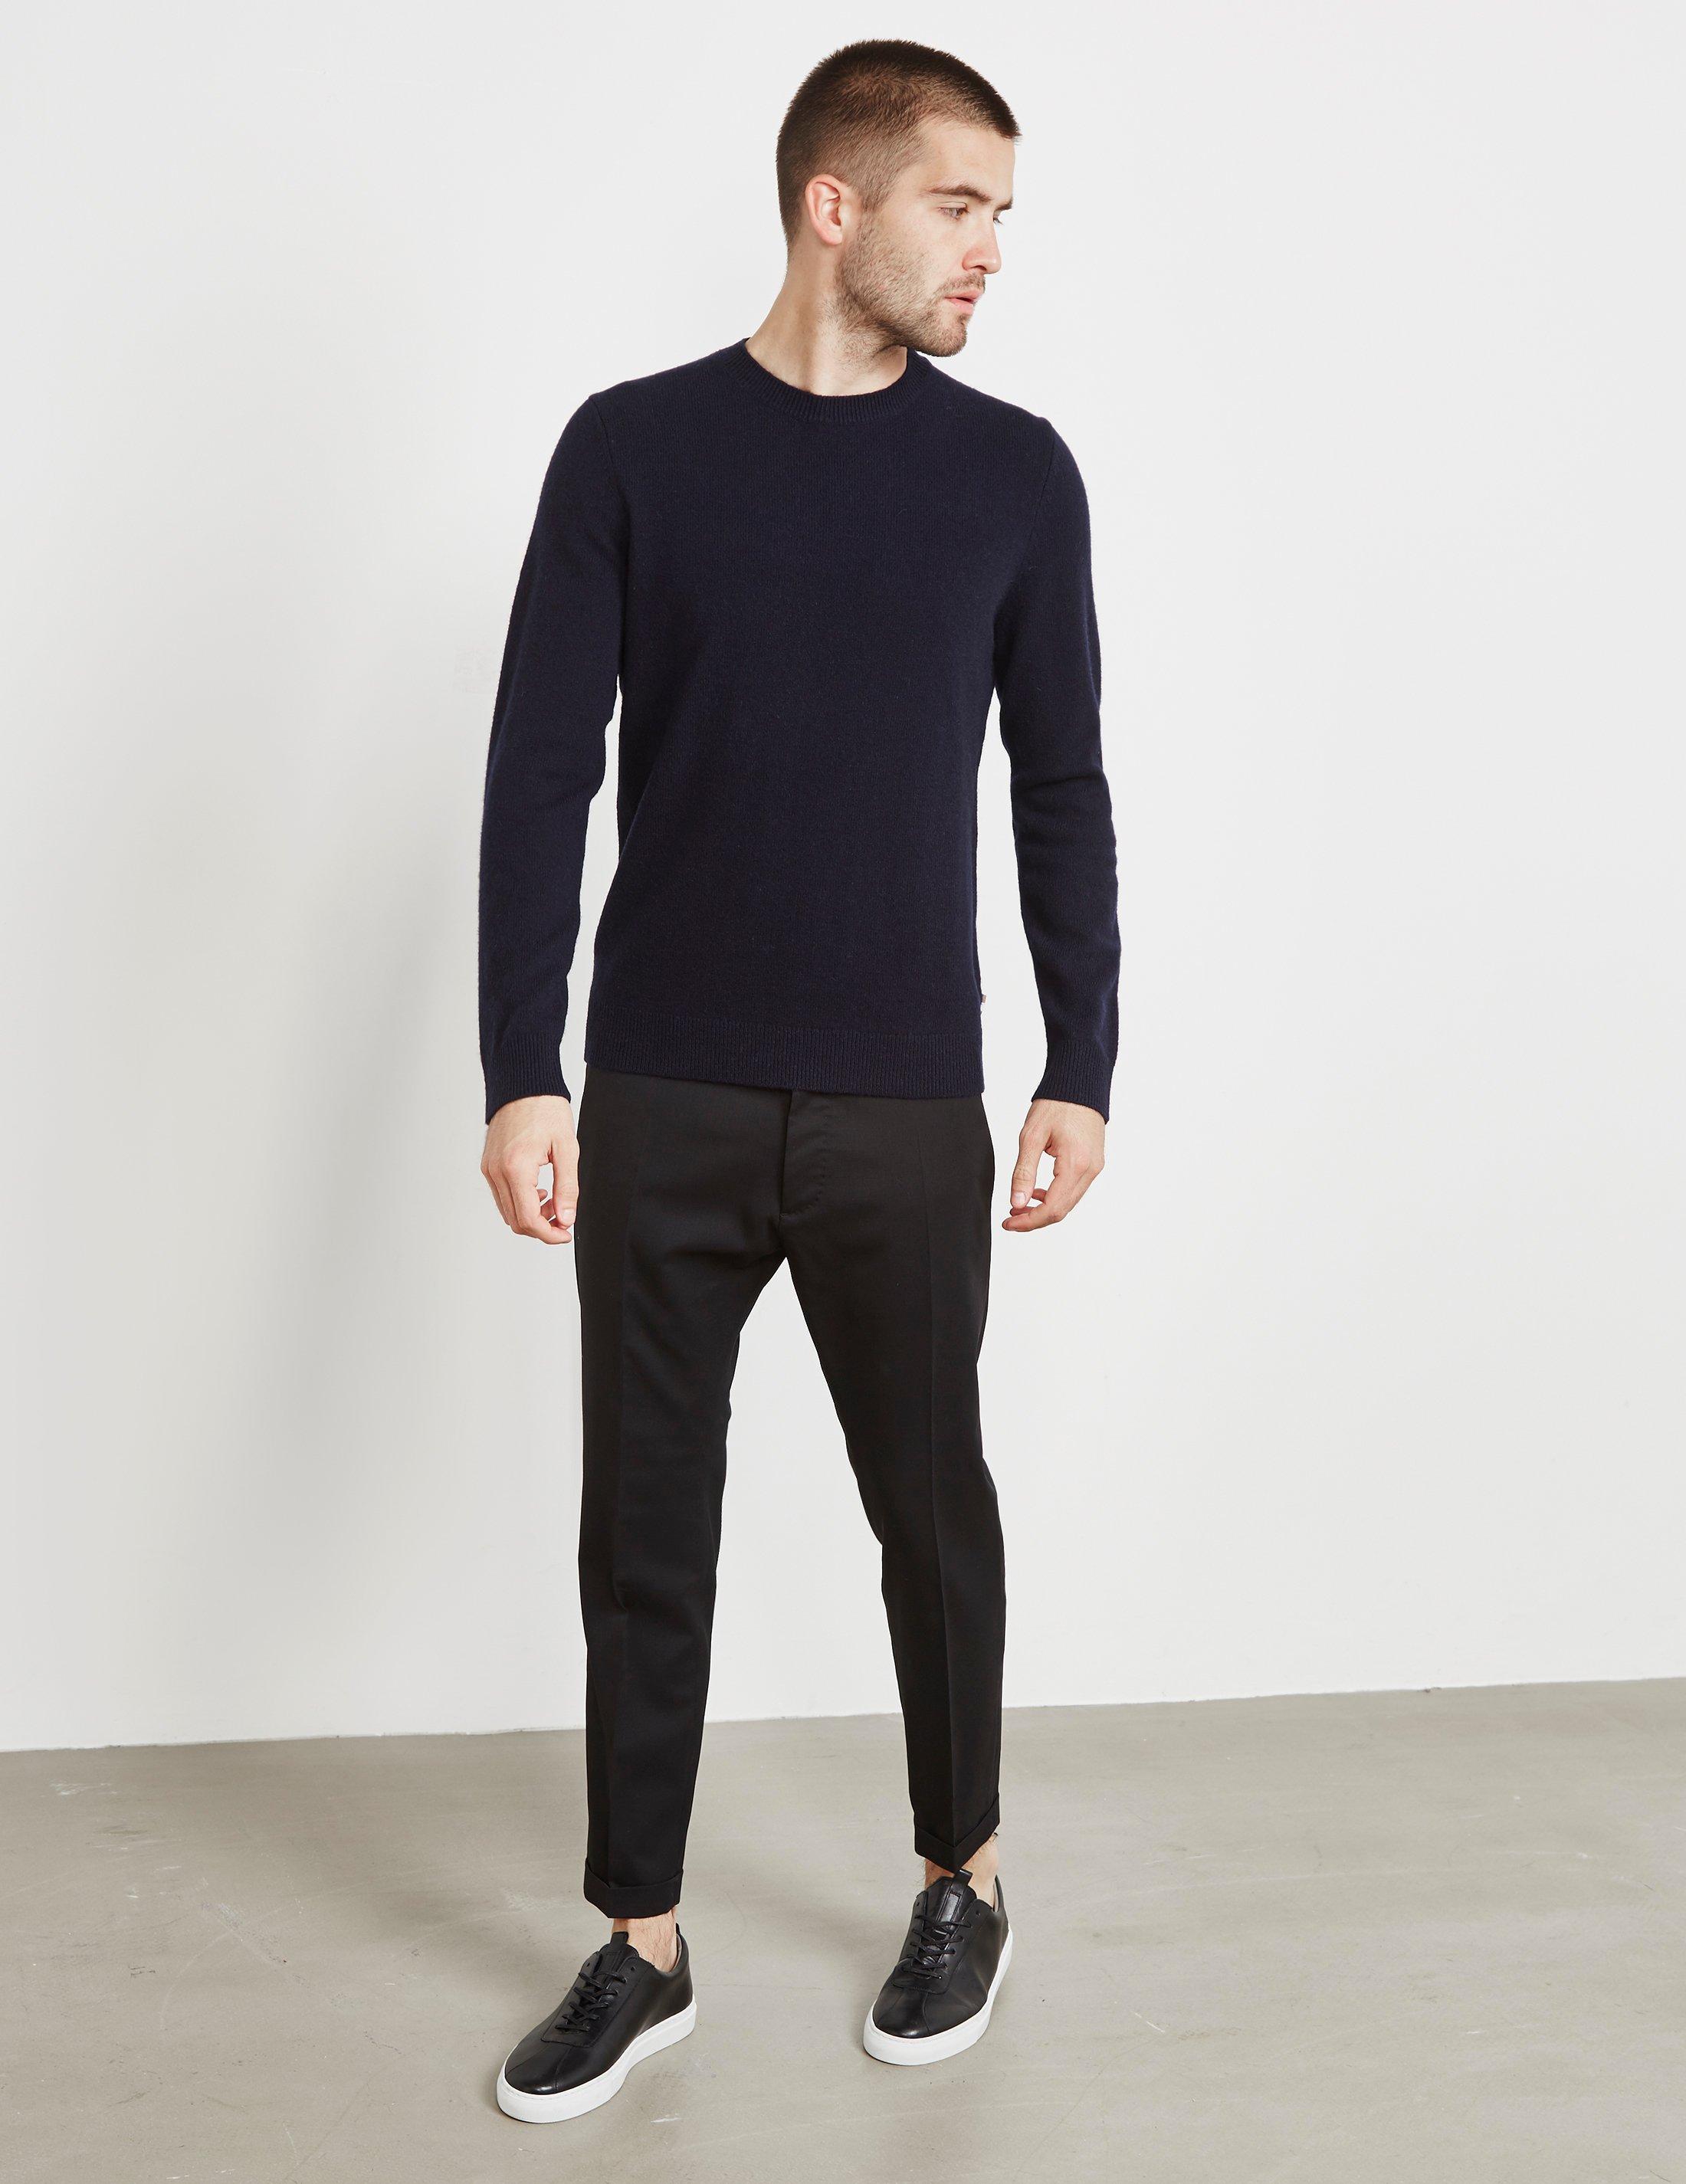 Aquascutum Wool Elbow Patch Knitted Jumper Navy Blue for Men - Lyst